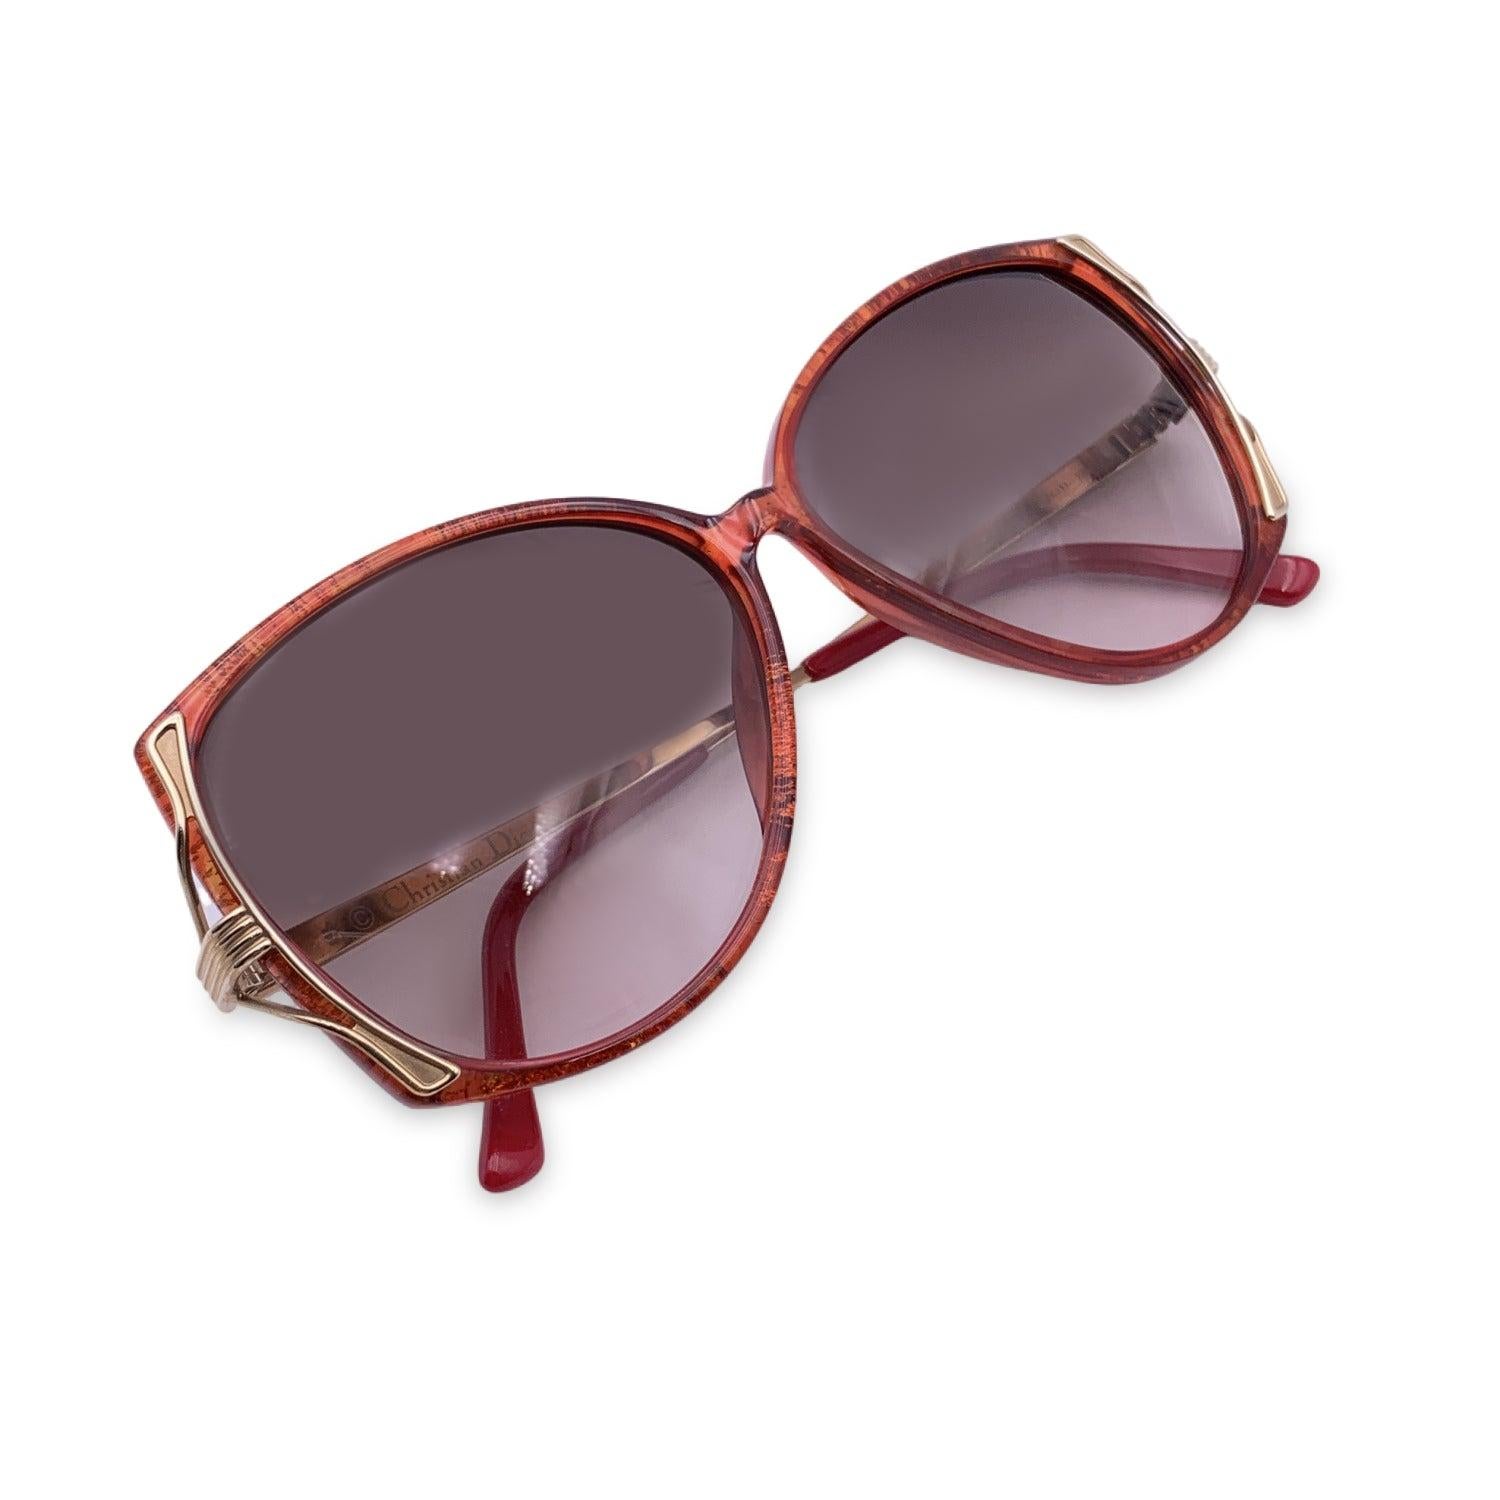 Vintage Christian Dior Women Sunglasses, Mod. 2529 30 Optyl. Size: 57/11 135mm. Red acetate frame, with with gold metal finish on the sides. CD logo con temples . 100% Total UVA/UVB protection. Brown gradient lenses. Details MATERIAL: Plastic COLOR: